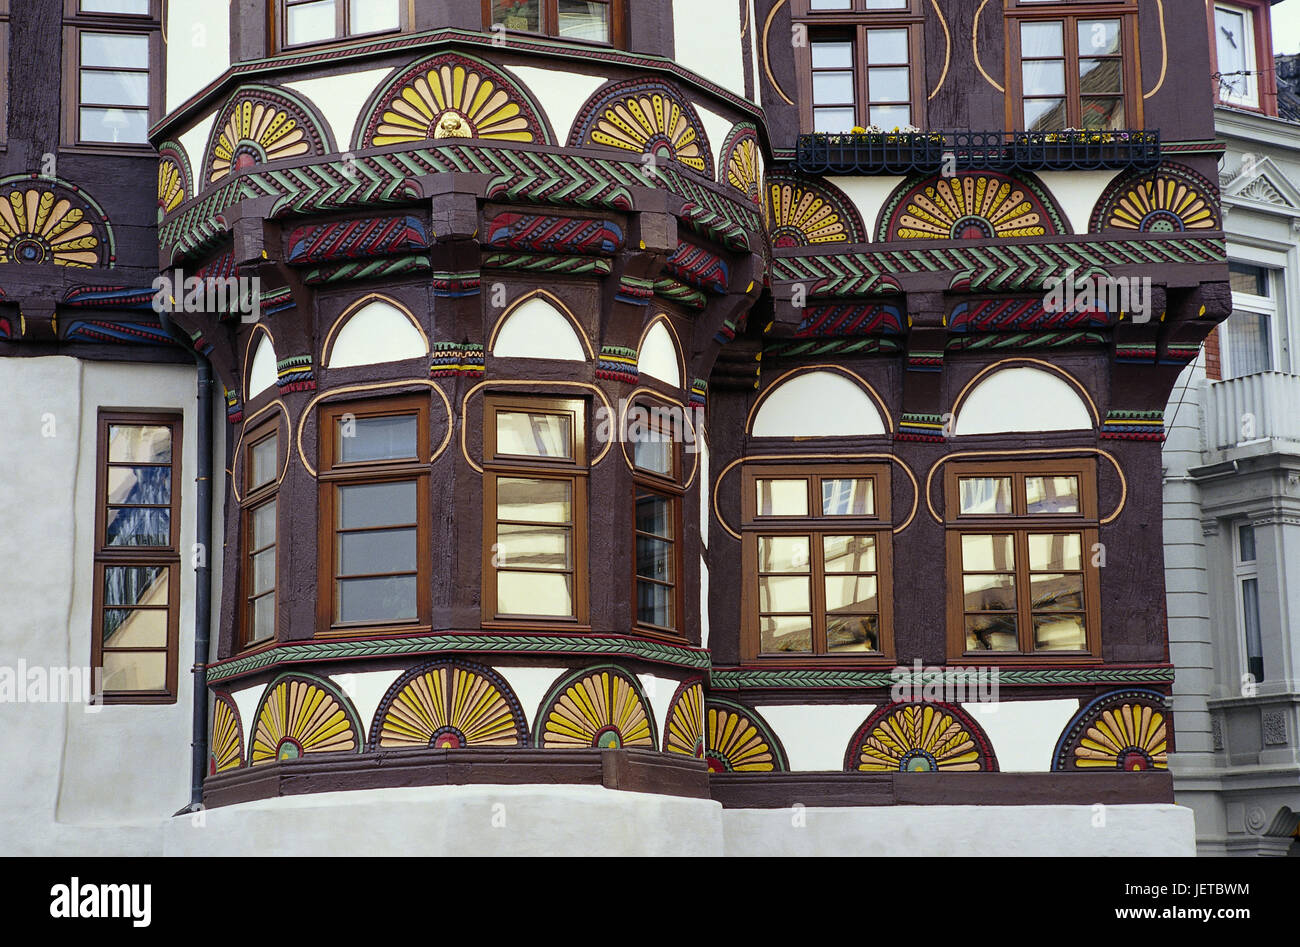 Germany, North Rhine-Westphalia, Höxter, Old Town, Dechanei, detail, facade, Teutoburger wood, Weser mountainous country, marketplace, house, building, historically, architecture, house facade, bay window, half-timbered, half-timbered house, beam, carving, in 1561, grace note, ornaments, professional rosettes, Palmetten, wooden relief, art, Adel's court, outside, Stock Photo